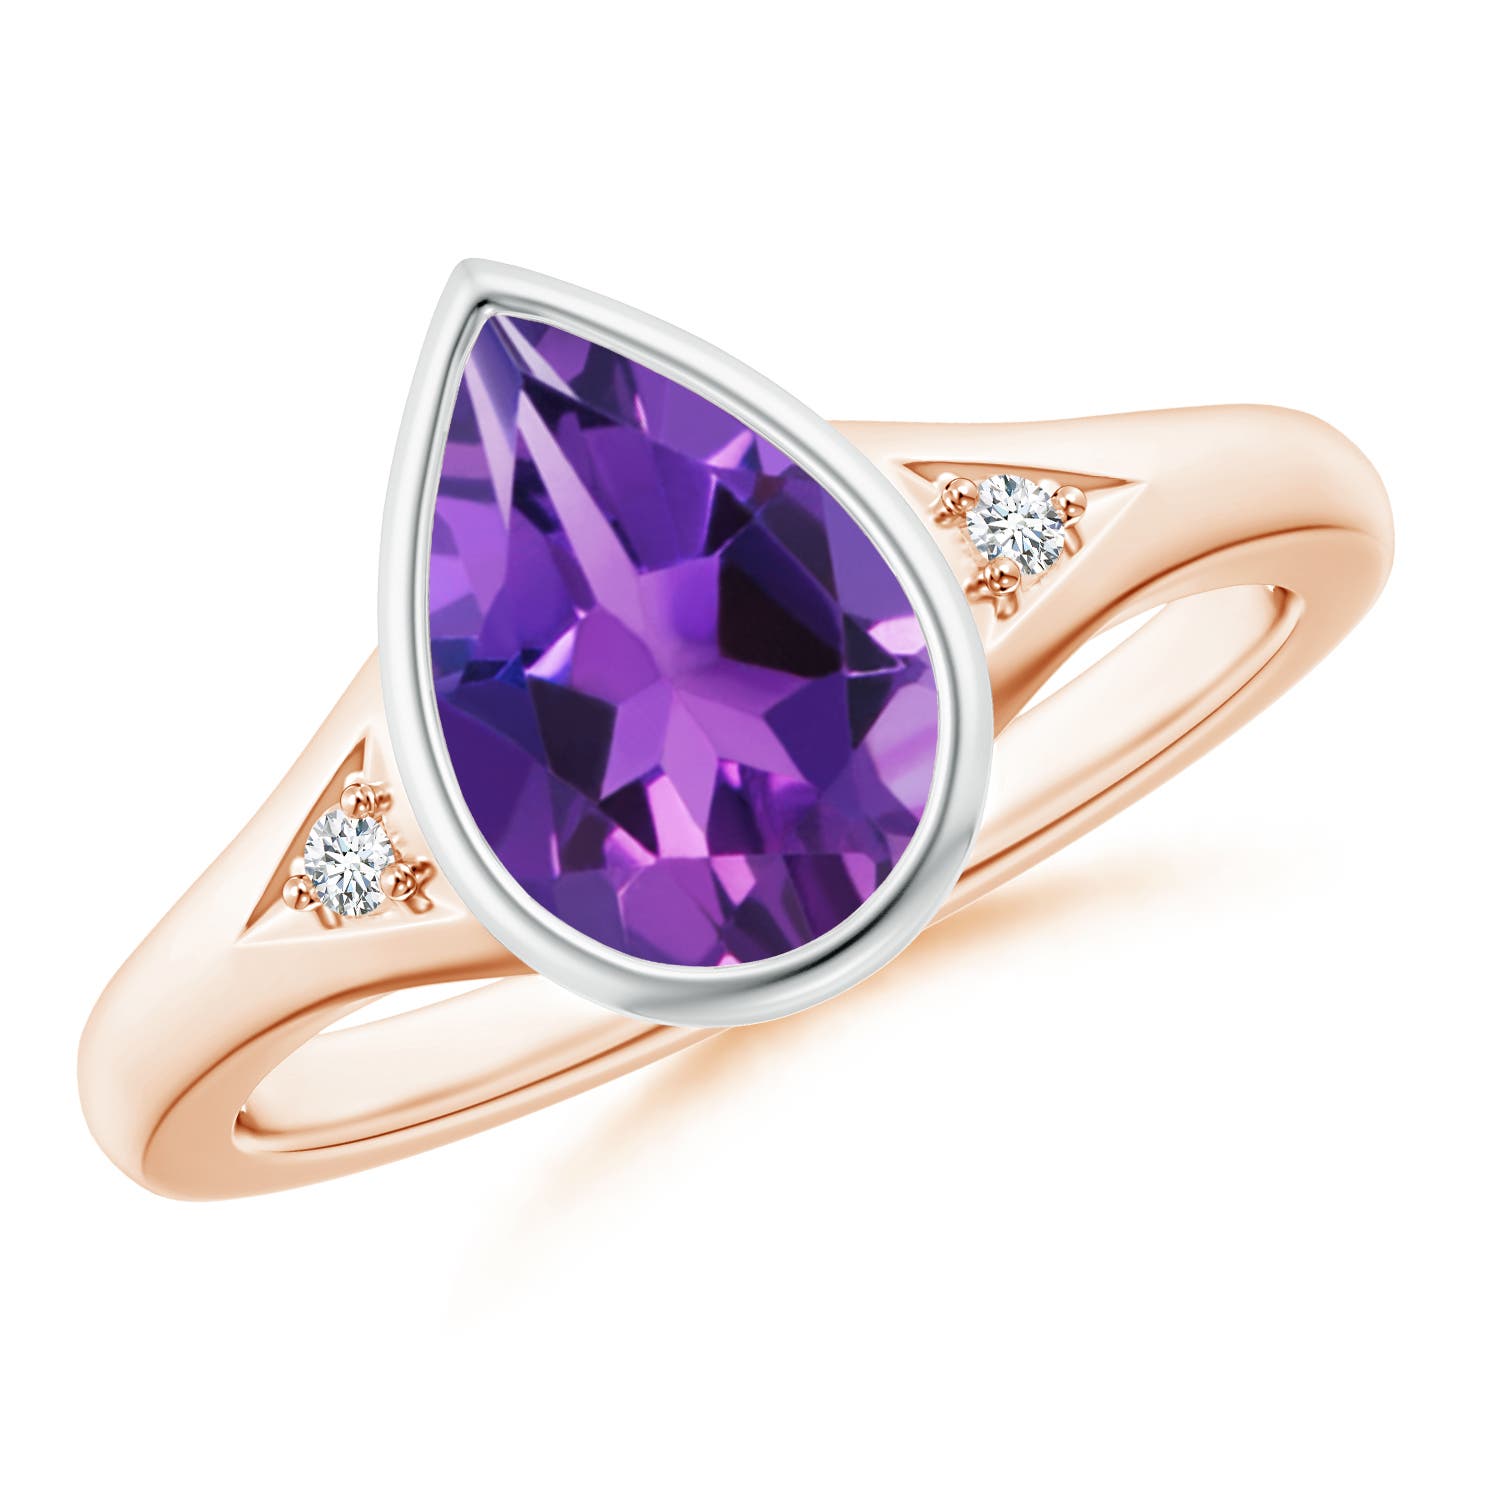 10x7mm AAAA Bezel-Set Pear-Shaped Amethyst Ring with Diamonds in Rose Gold White Gold